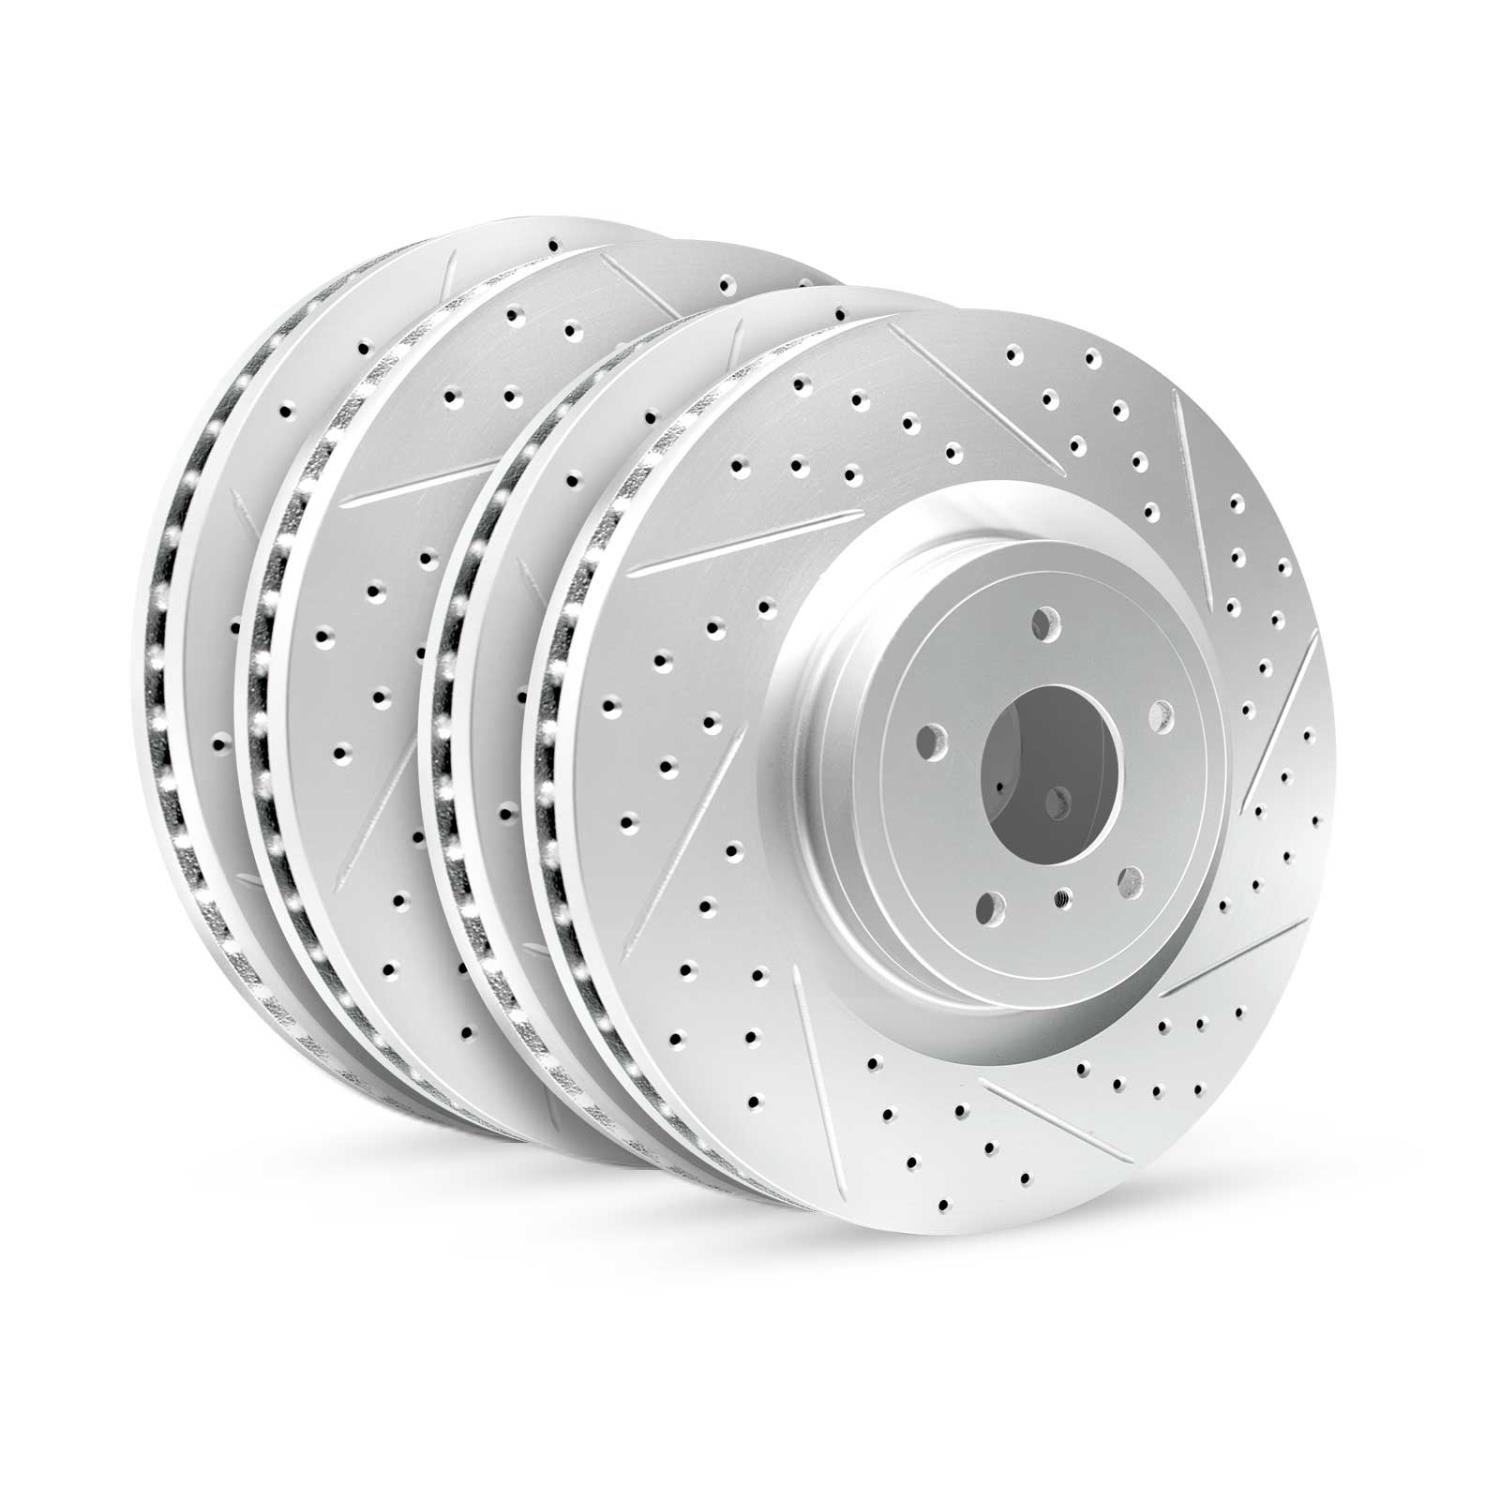 GEO-Carbon Drilled/Slotted Rotors, 2006-2007 BMW, Position: Front/Rear